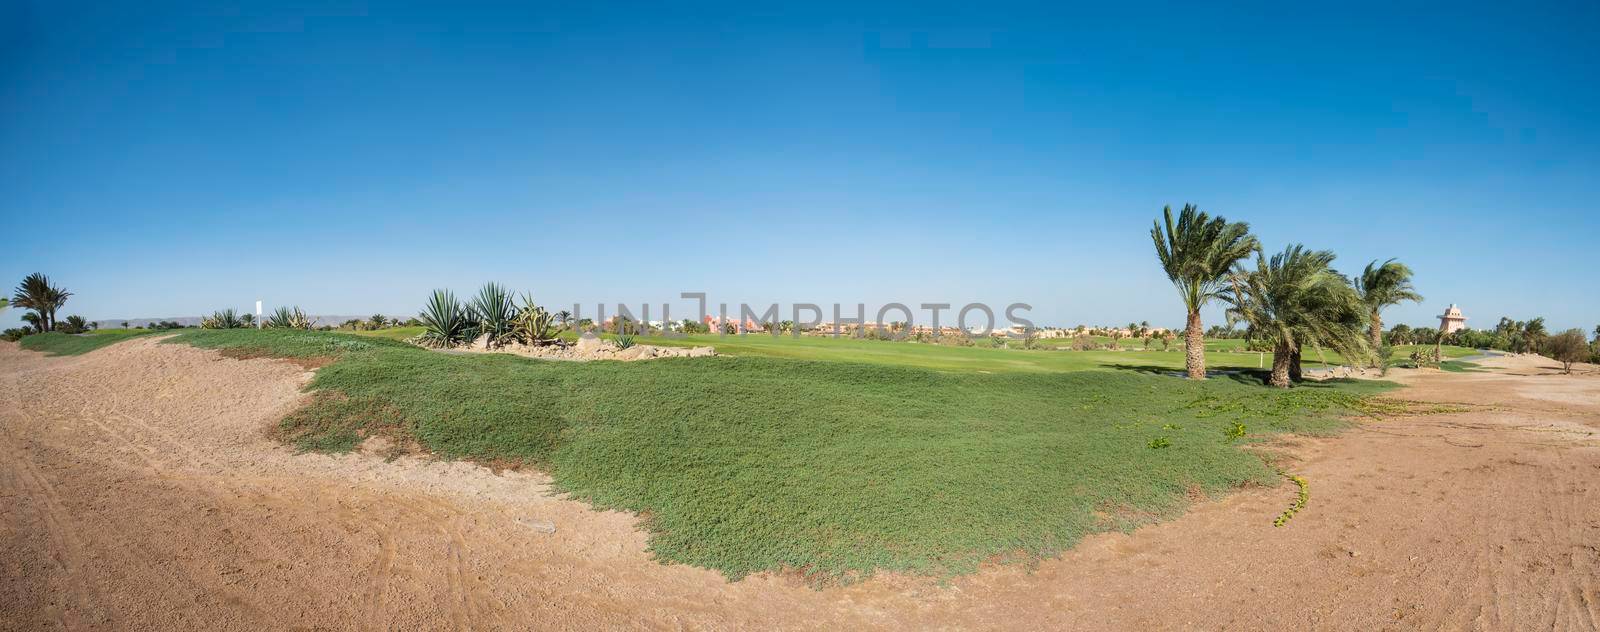 Panoramic view across golf course through beautiful landscaped gardens in tropical hotel resort